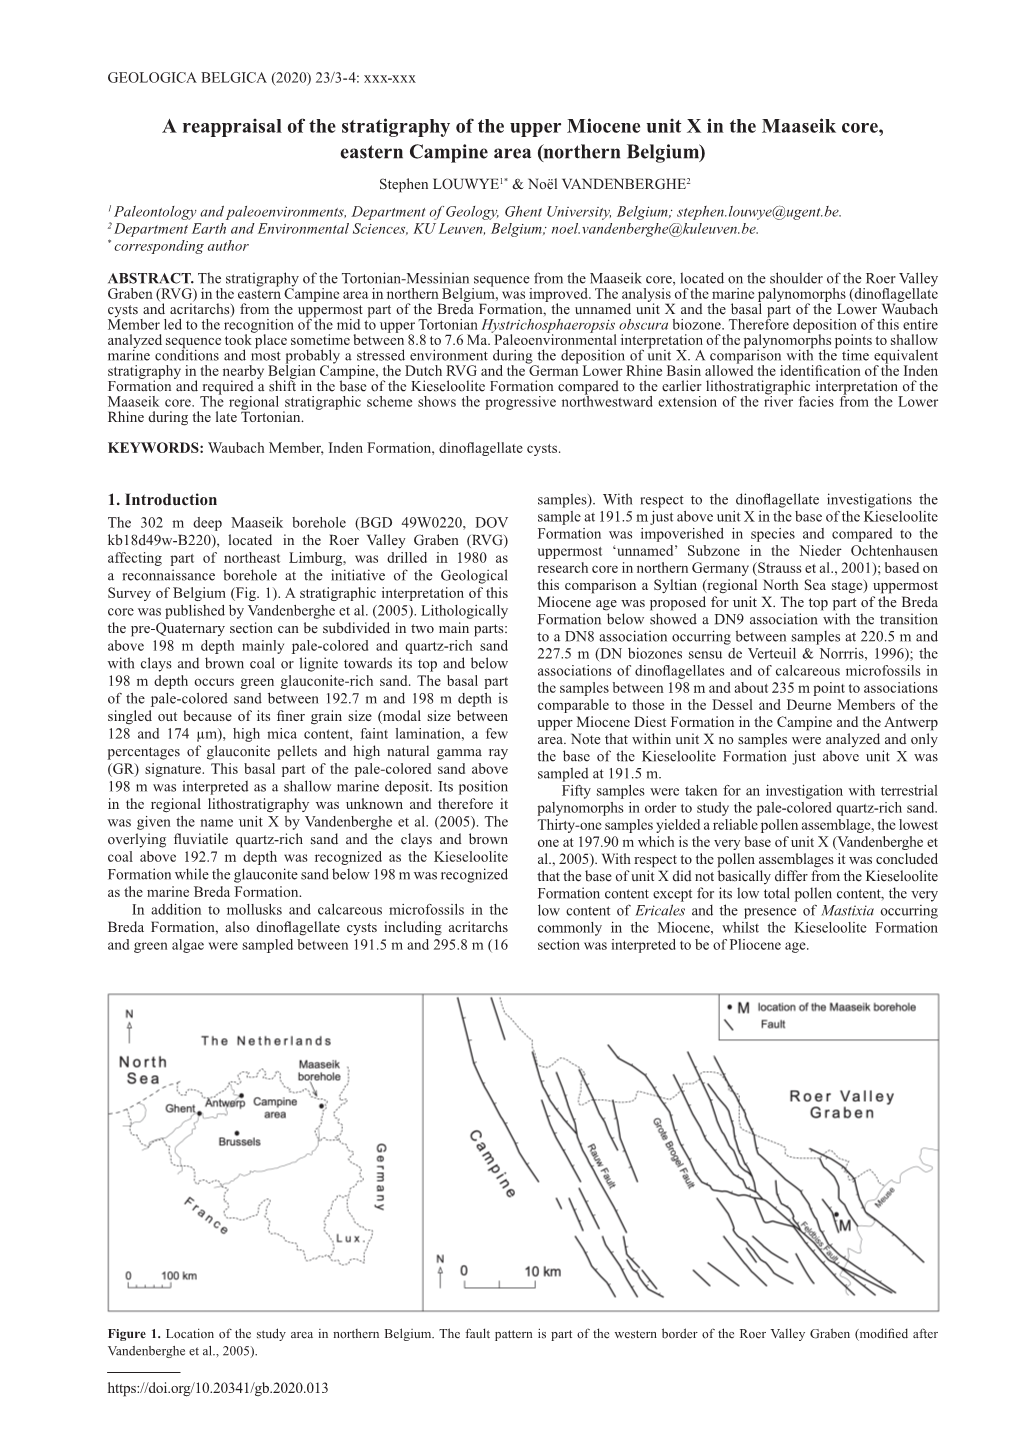 A Reappraisal of the Stratigraphy of the Upper Miocene Unit X in The